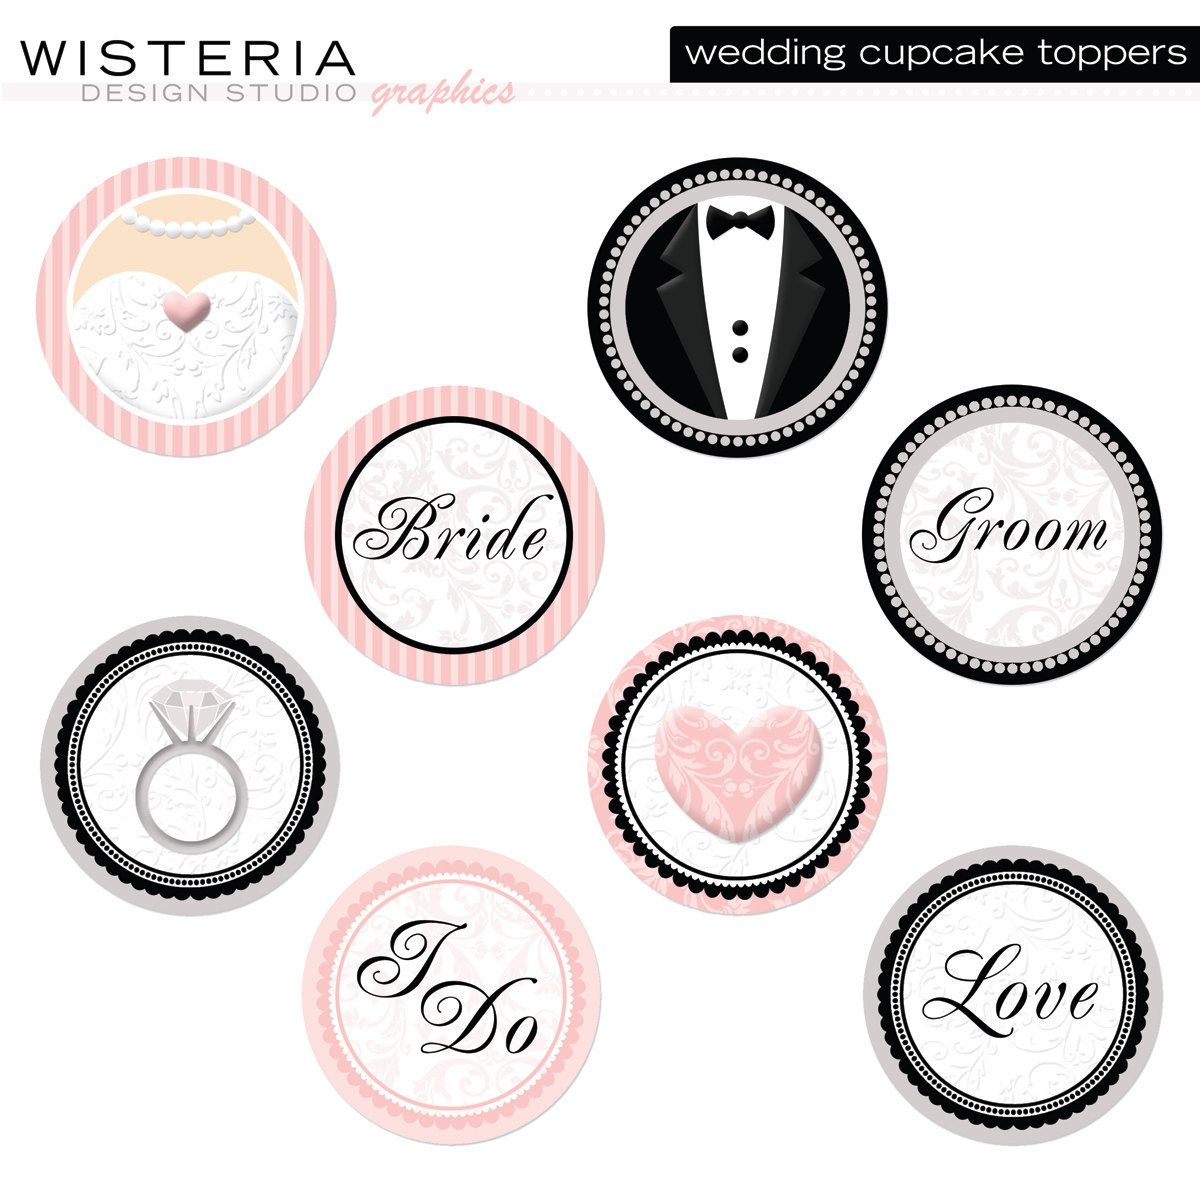 Wedding Cupcake Toppers - Diy Printables - Instant Download - Free Printable Cupcake Toppers Bridal Shower